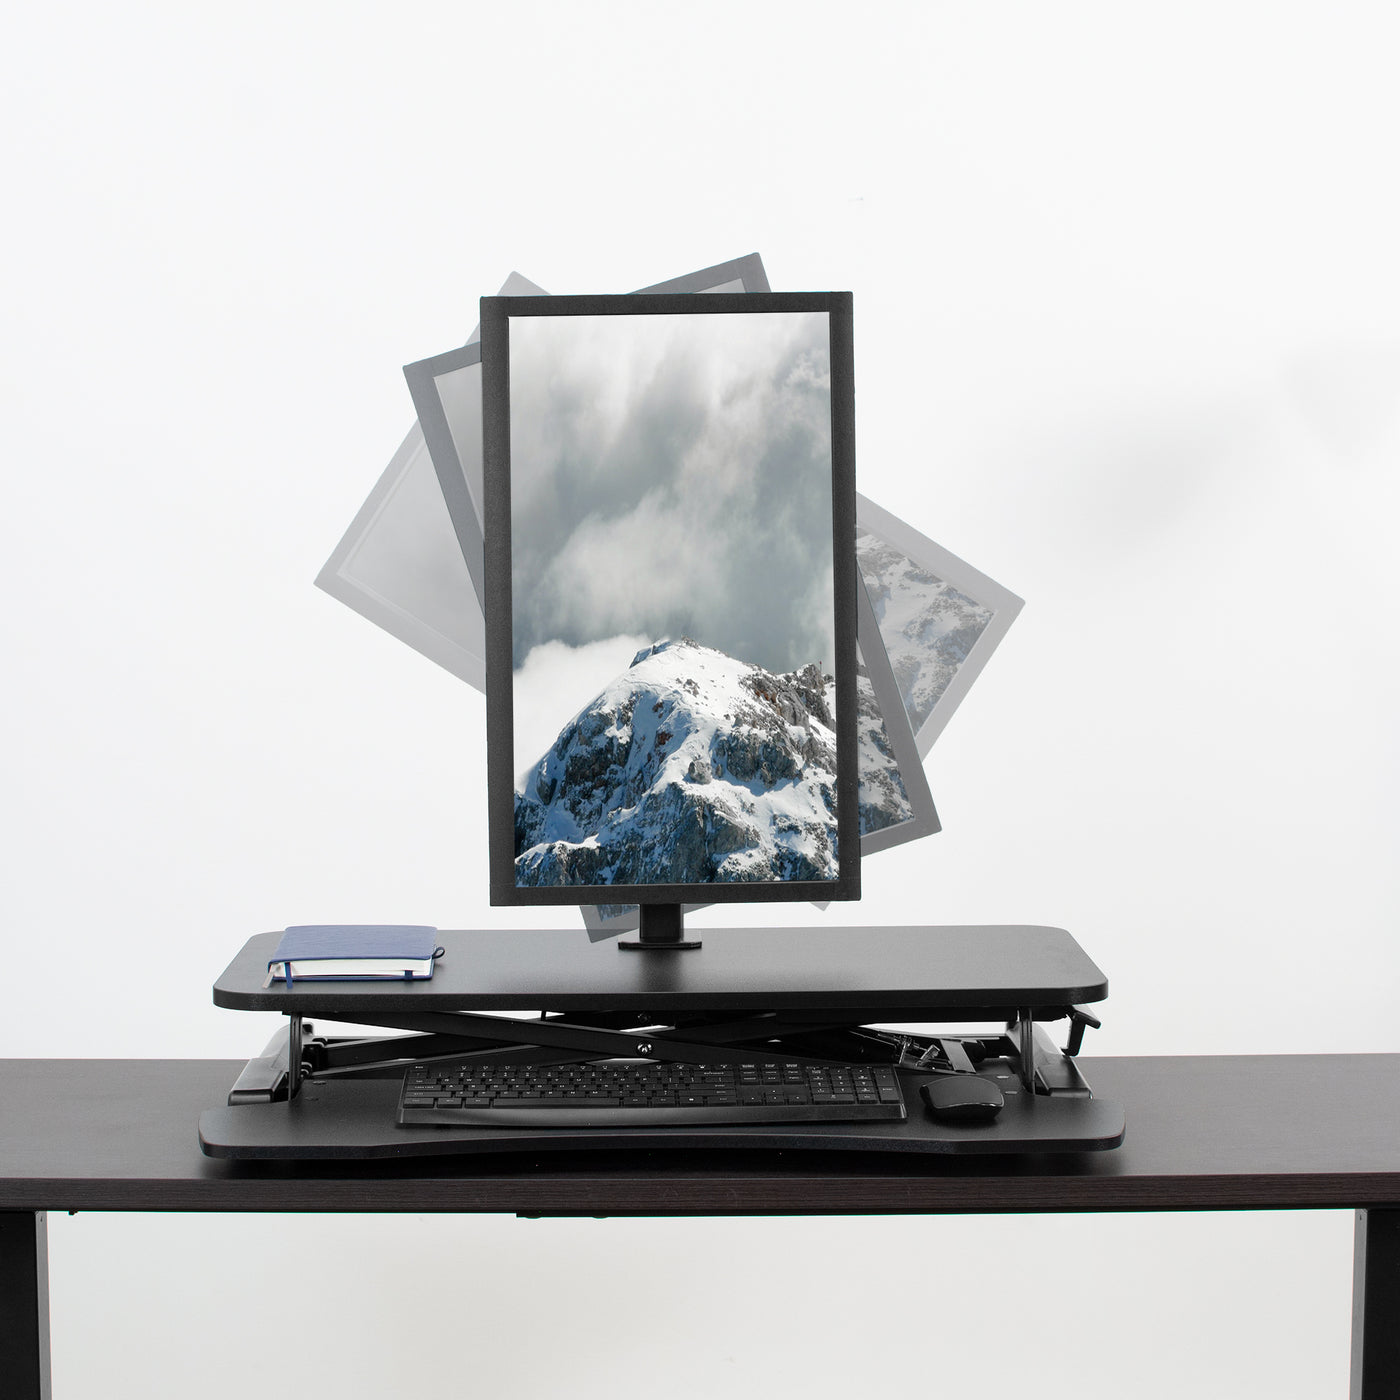 The built-in monitor mount can securely display your monitor vertically or horizontally. 